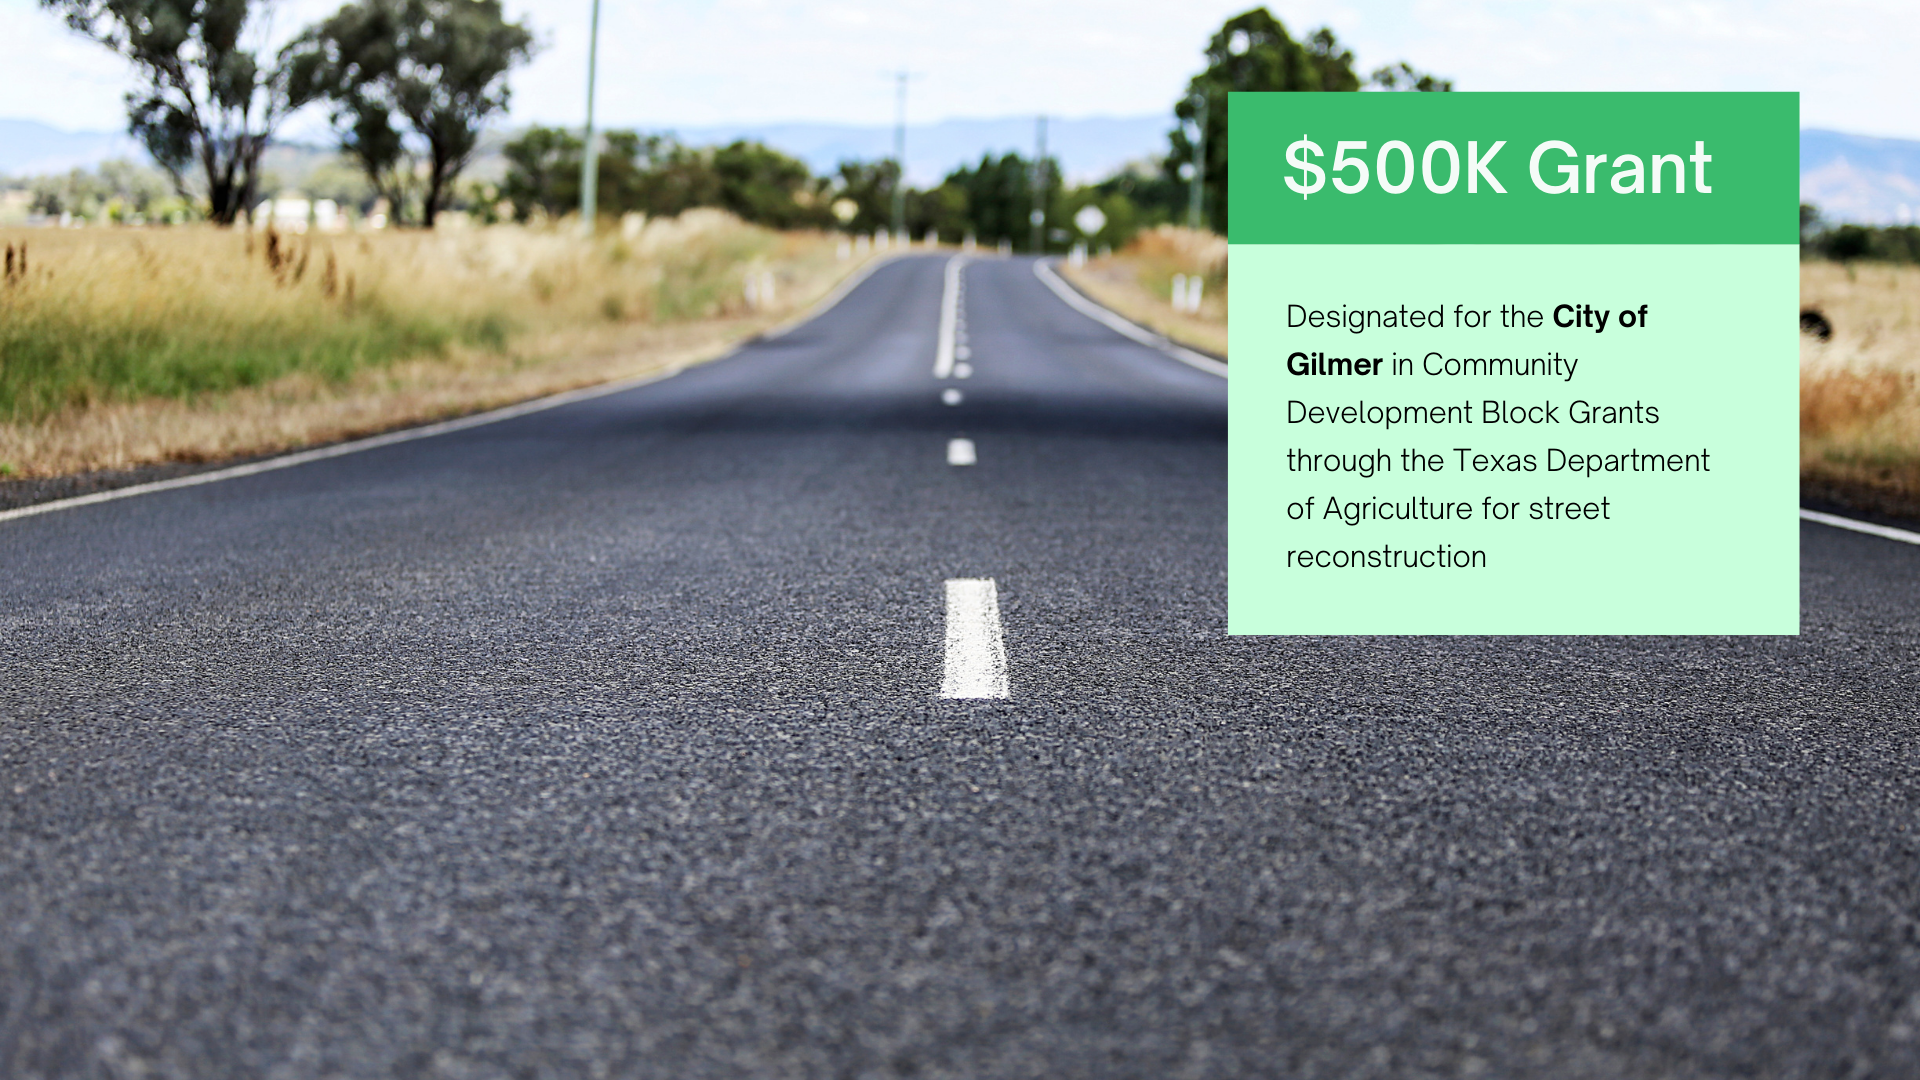 A $ 500k grant is being advertised on a road